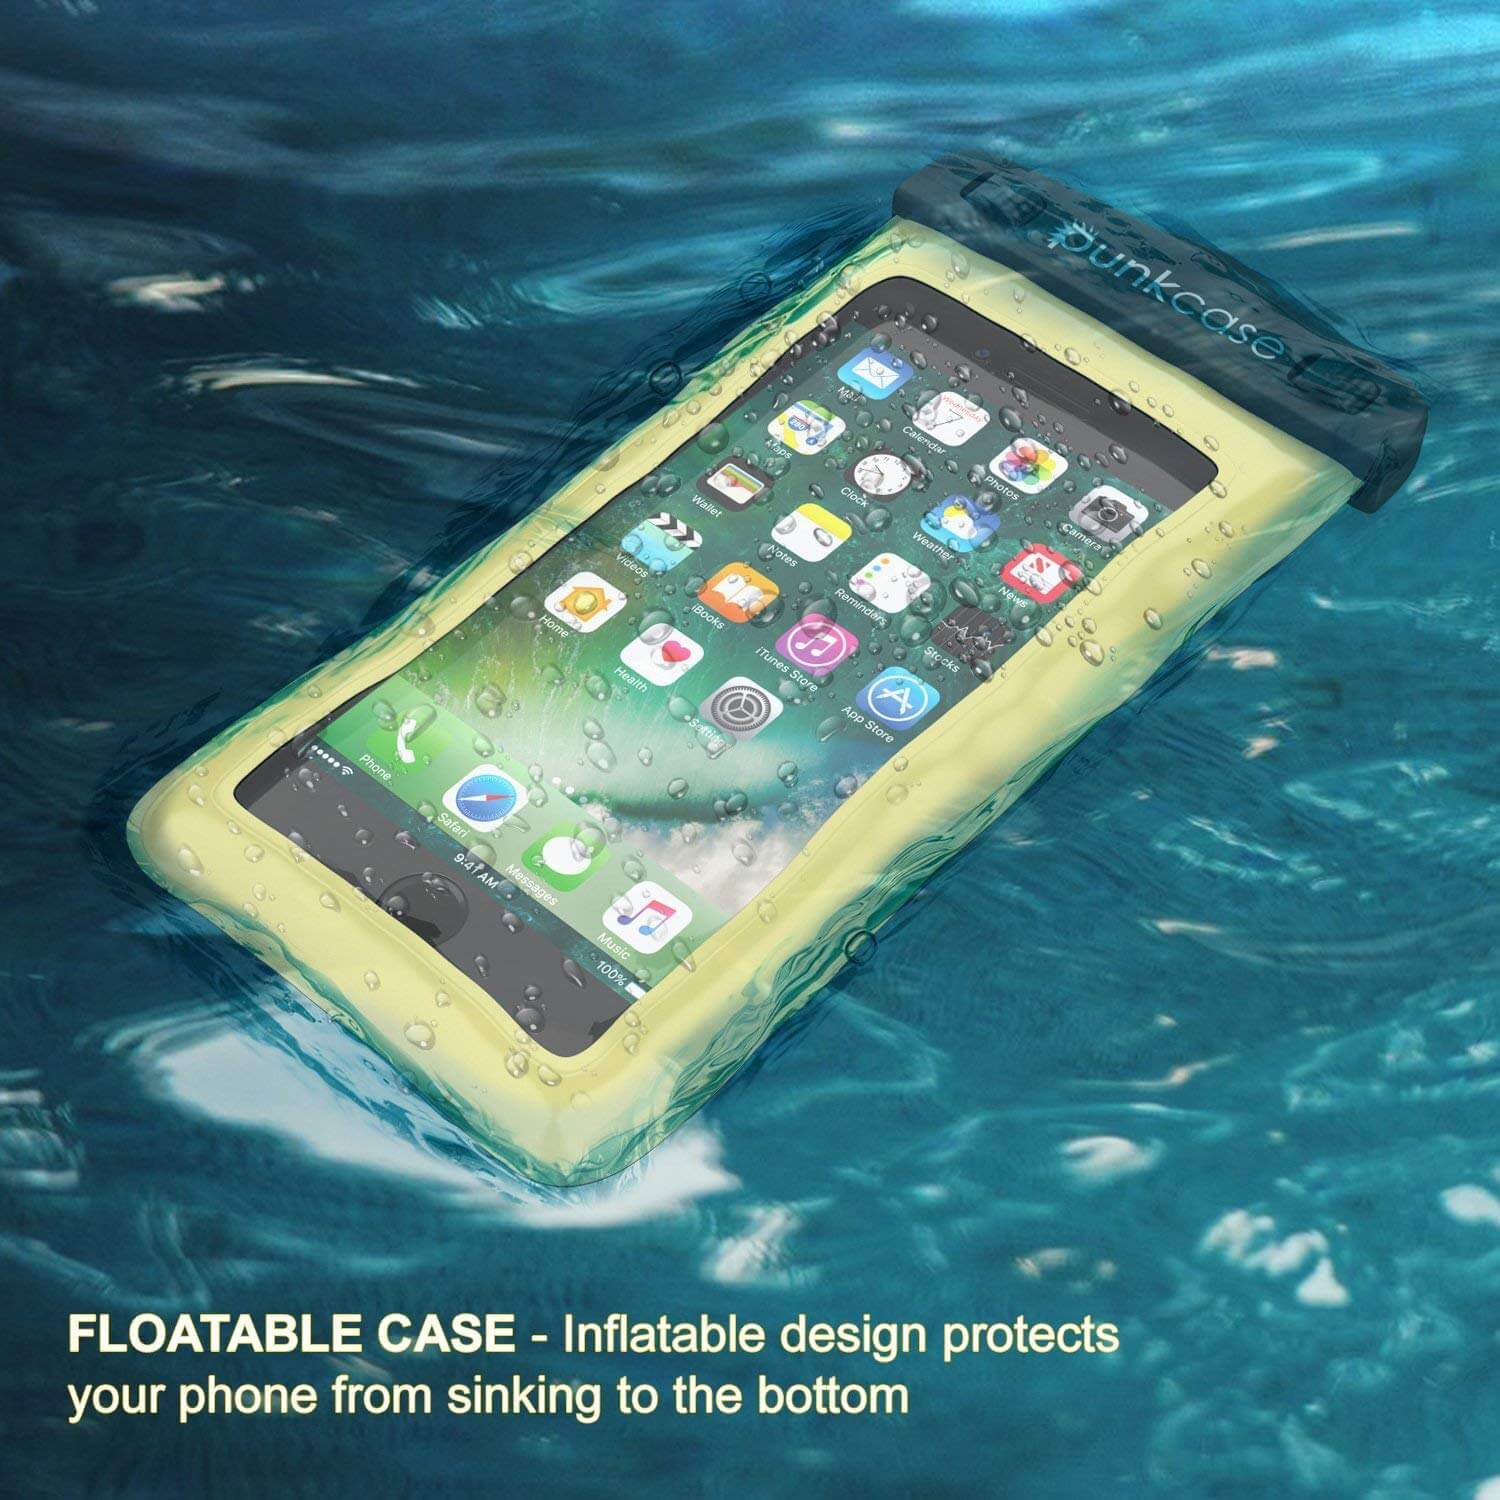 Waterproof Phone Pouch, PunkBag Universal Floating Dry Case Bag for most Cell Phones [Light Green] - PunkCase NZ